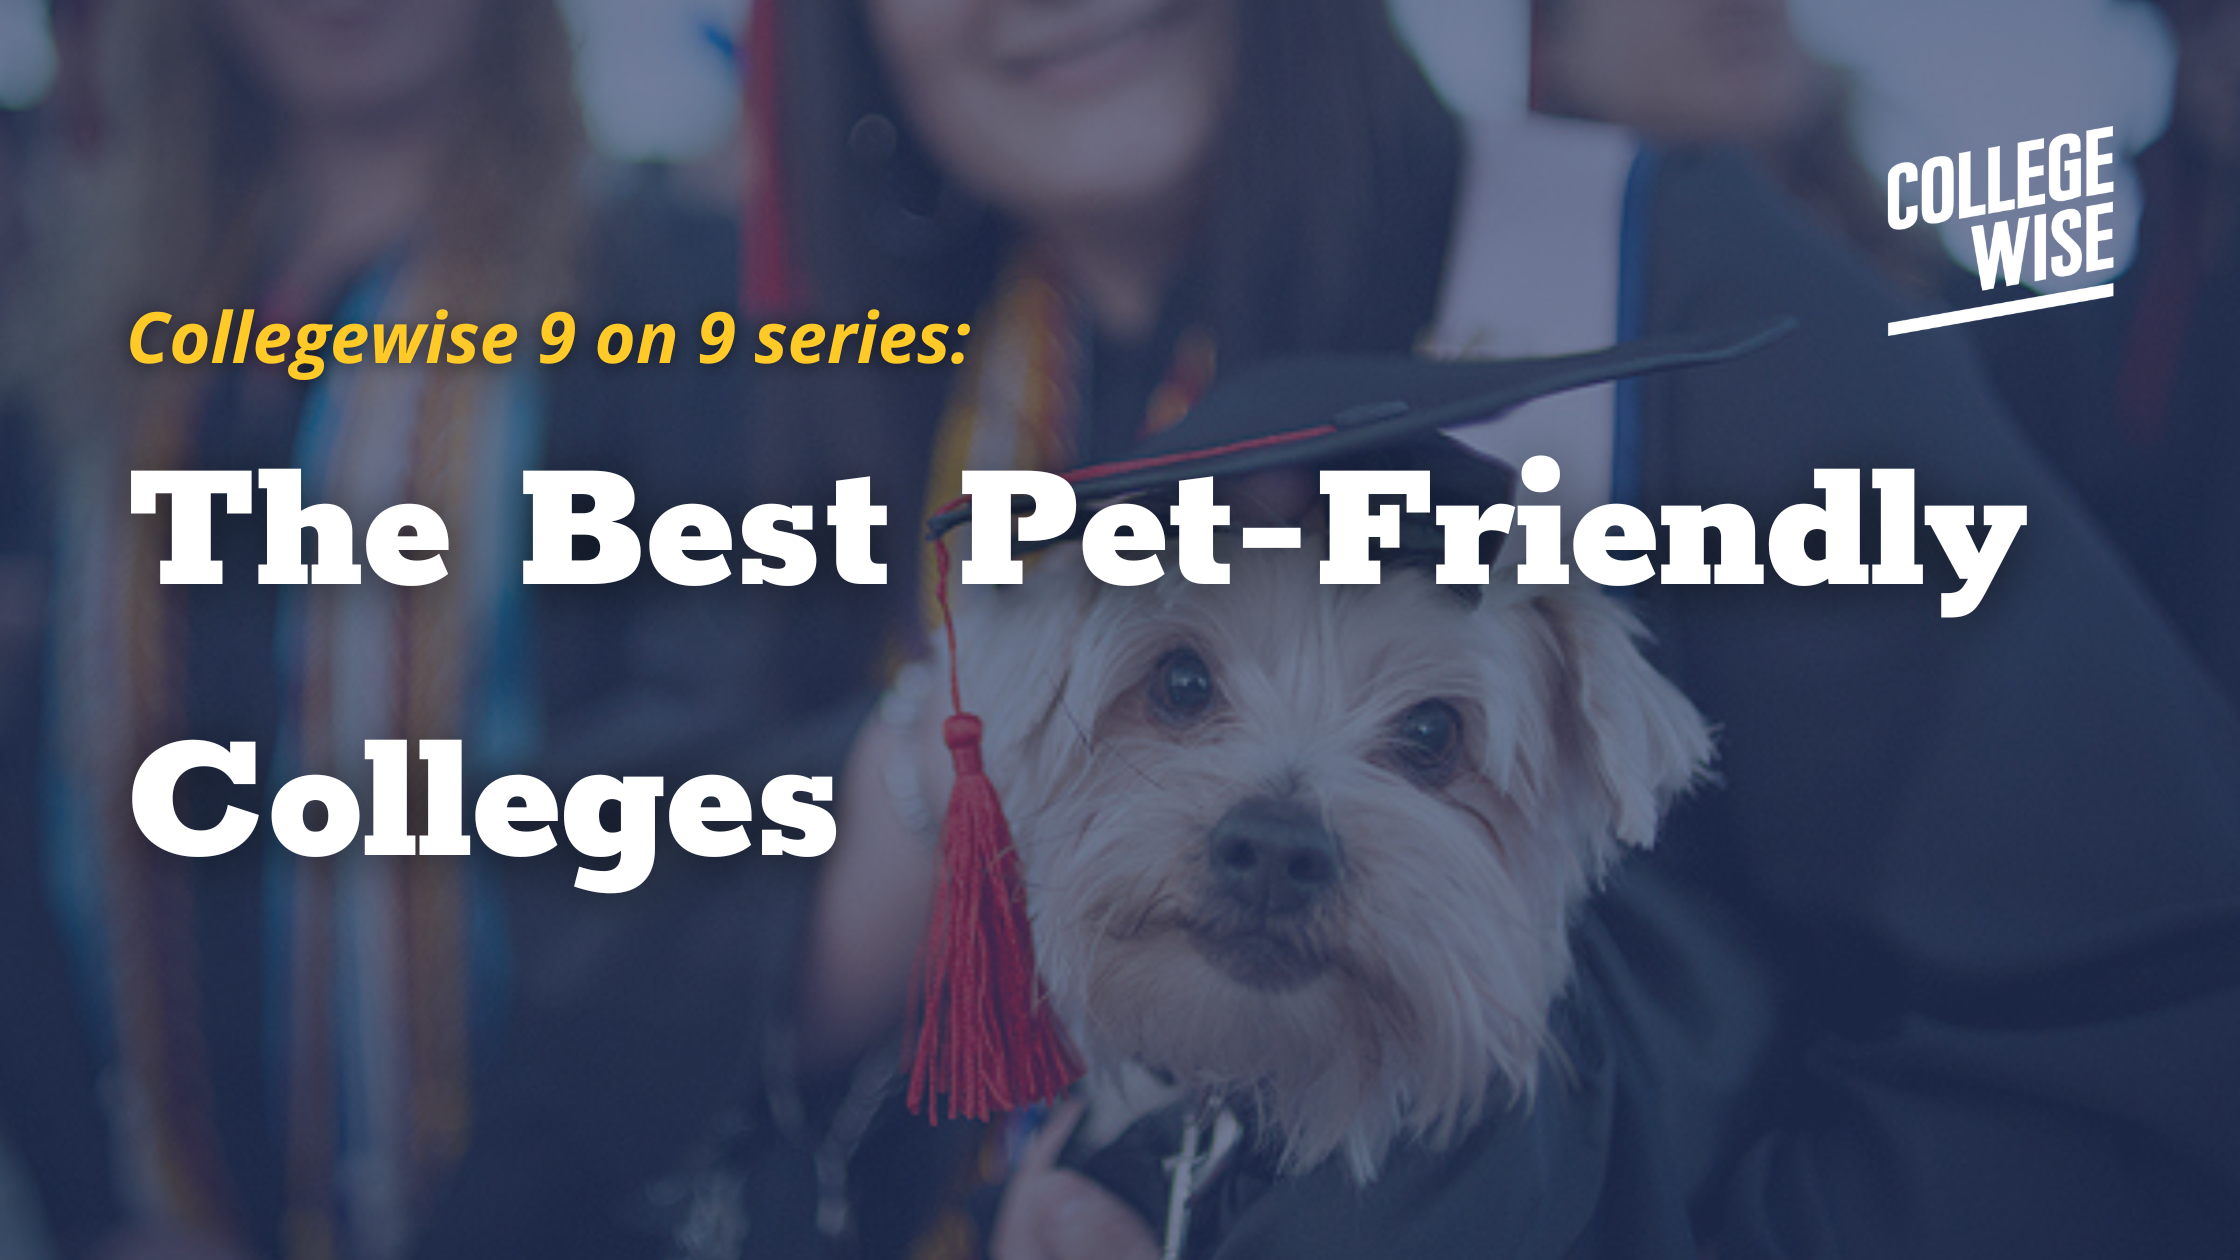 The Best Pet-Friendly Colleges